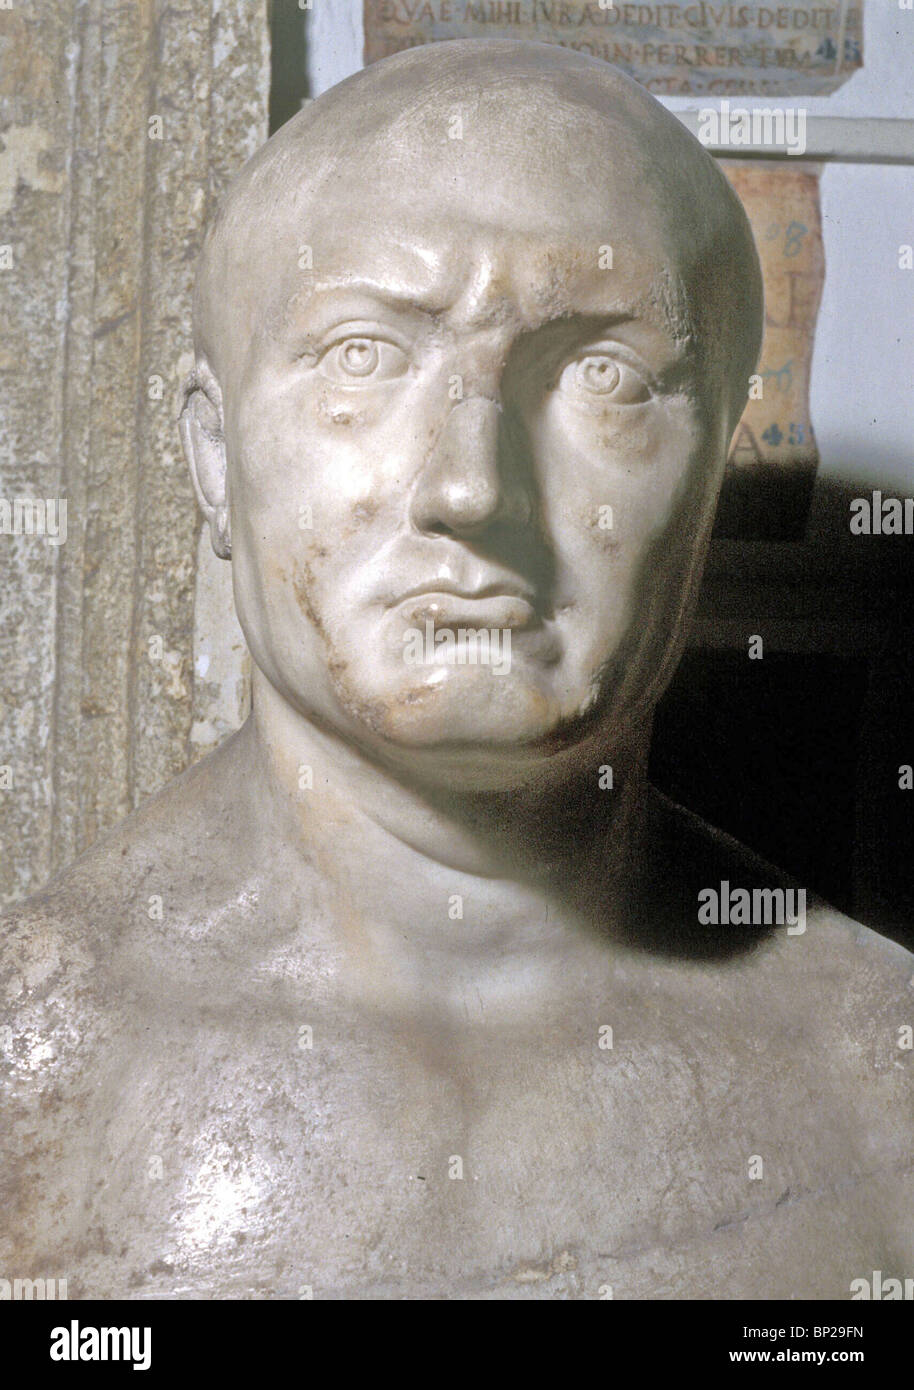 BUST OF SCIPIO AFRICANUS Roman general noted for his victory over the Carthaginian leader Hannibal in the great Battle of Zama Stock Photo